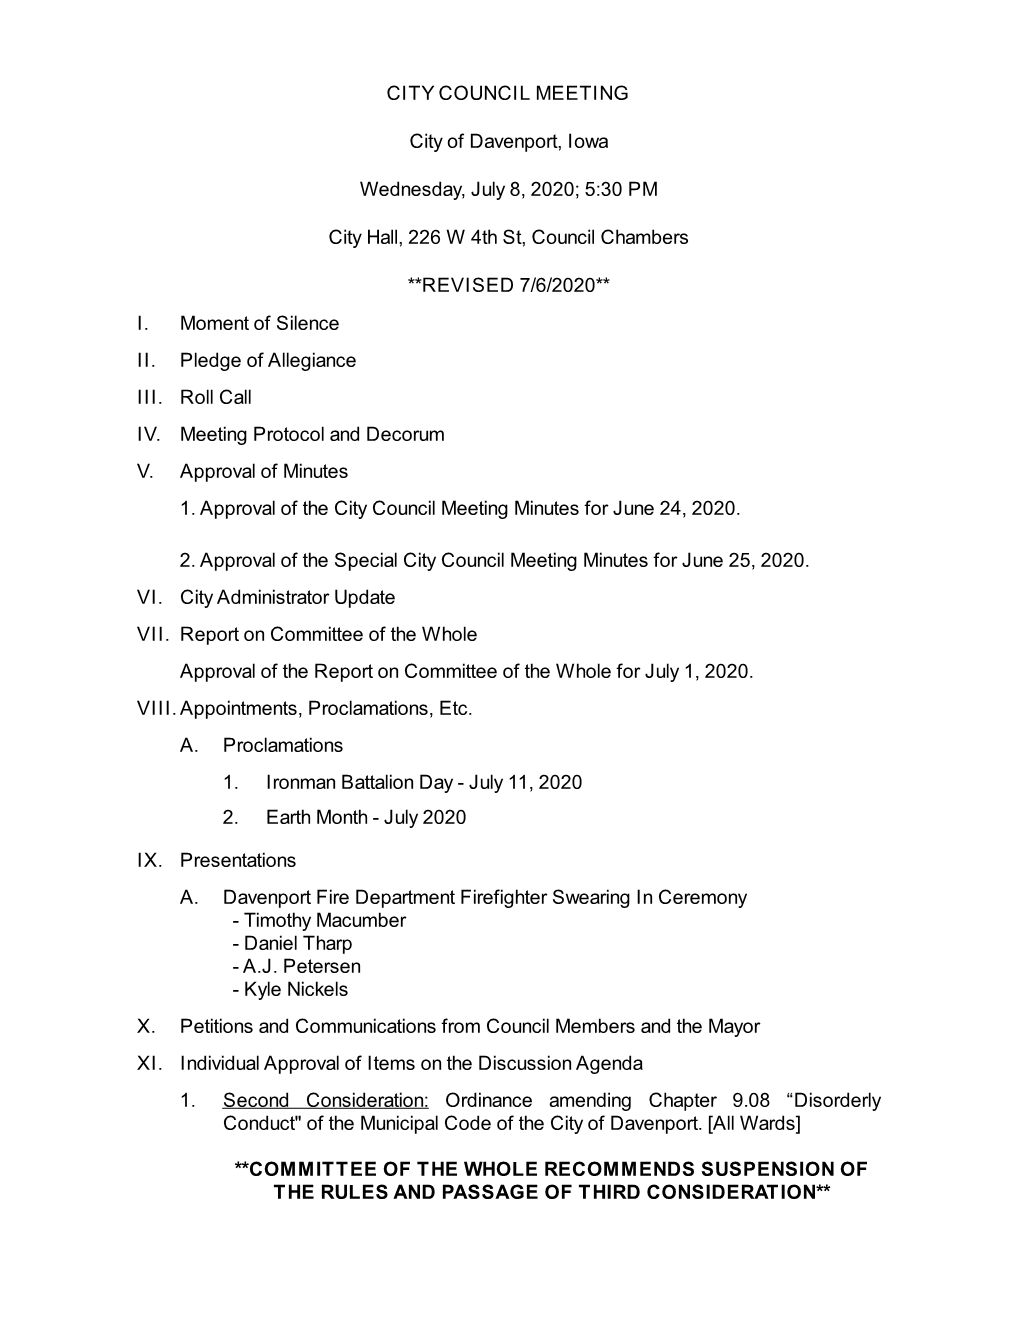 CITY COUNCIL MEETING City of Davenport, Iowa Wednesday, July 8